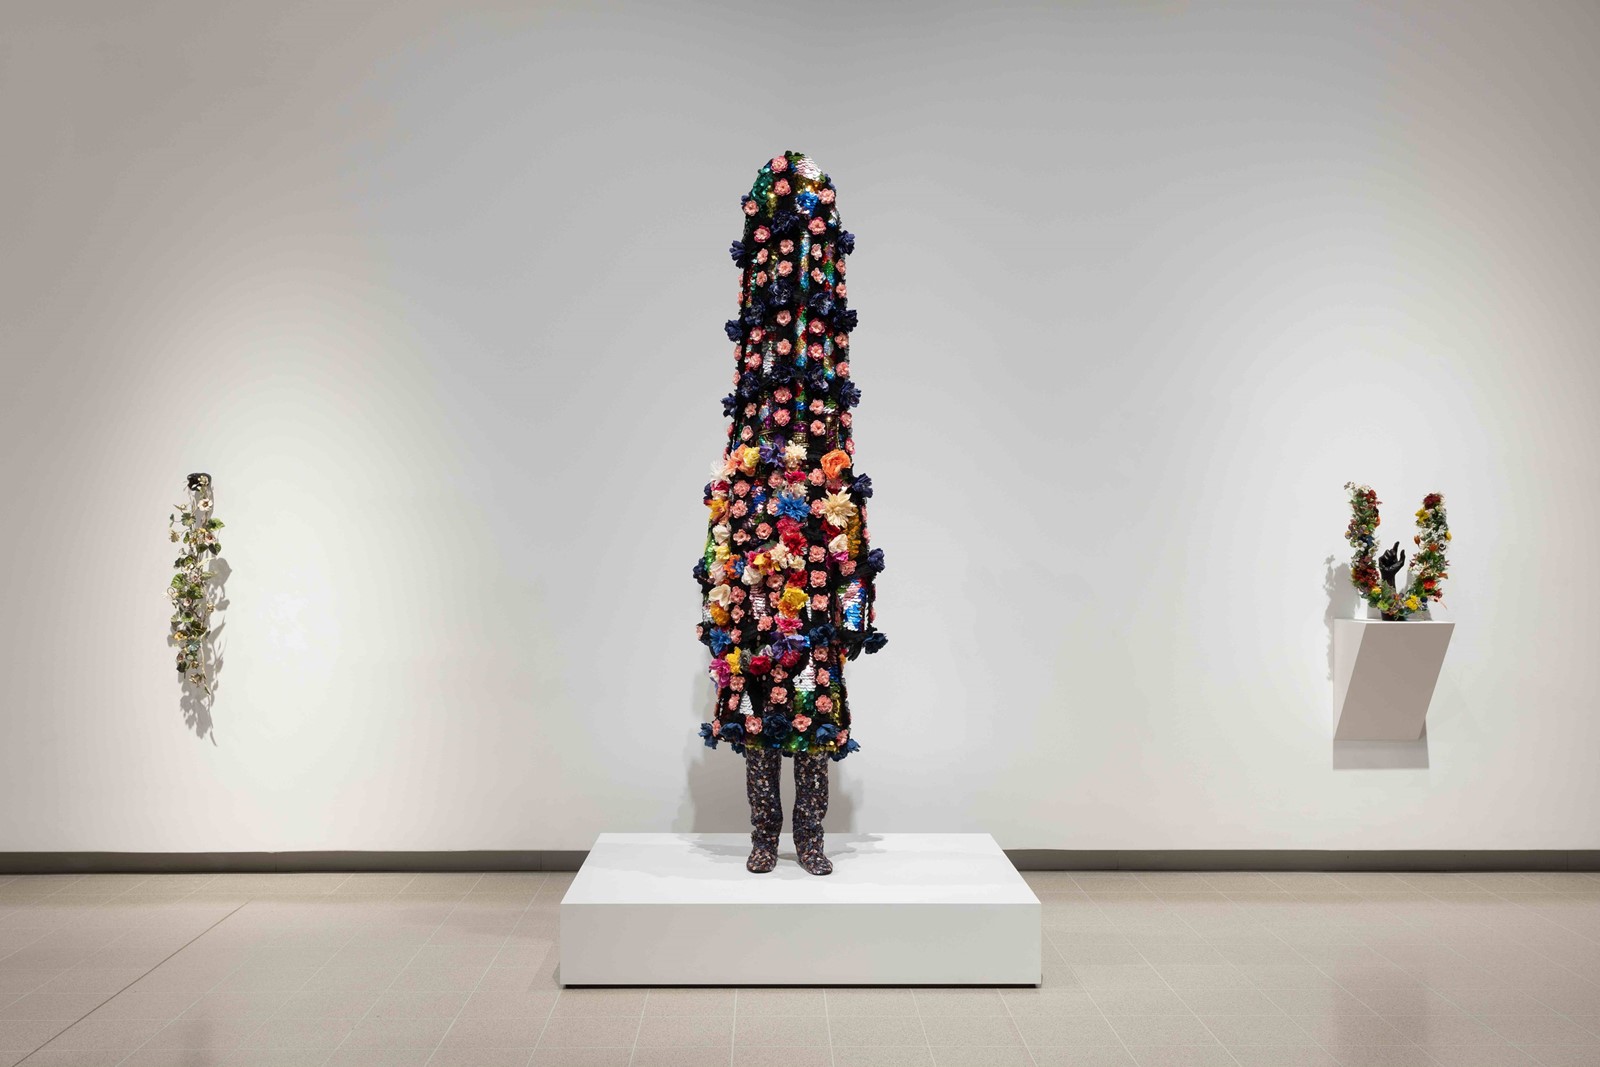 Installation View of Nick Cave, Soundsuit 9_29, 20